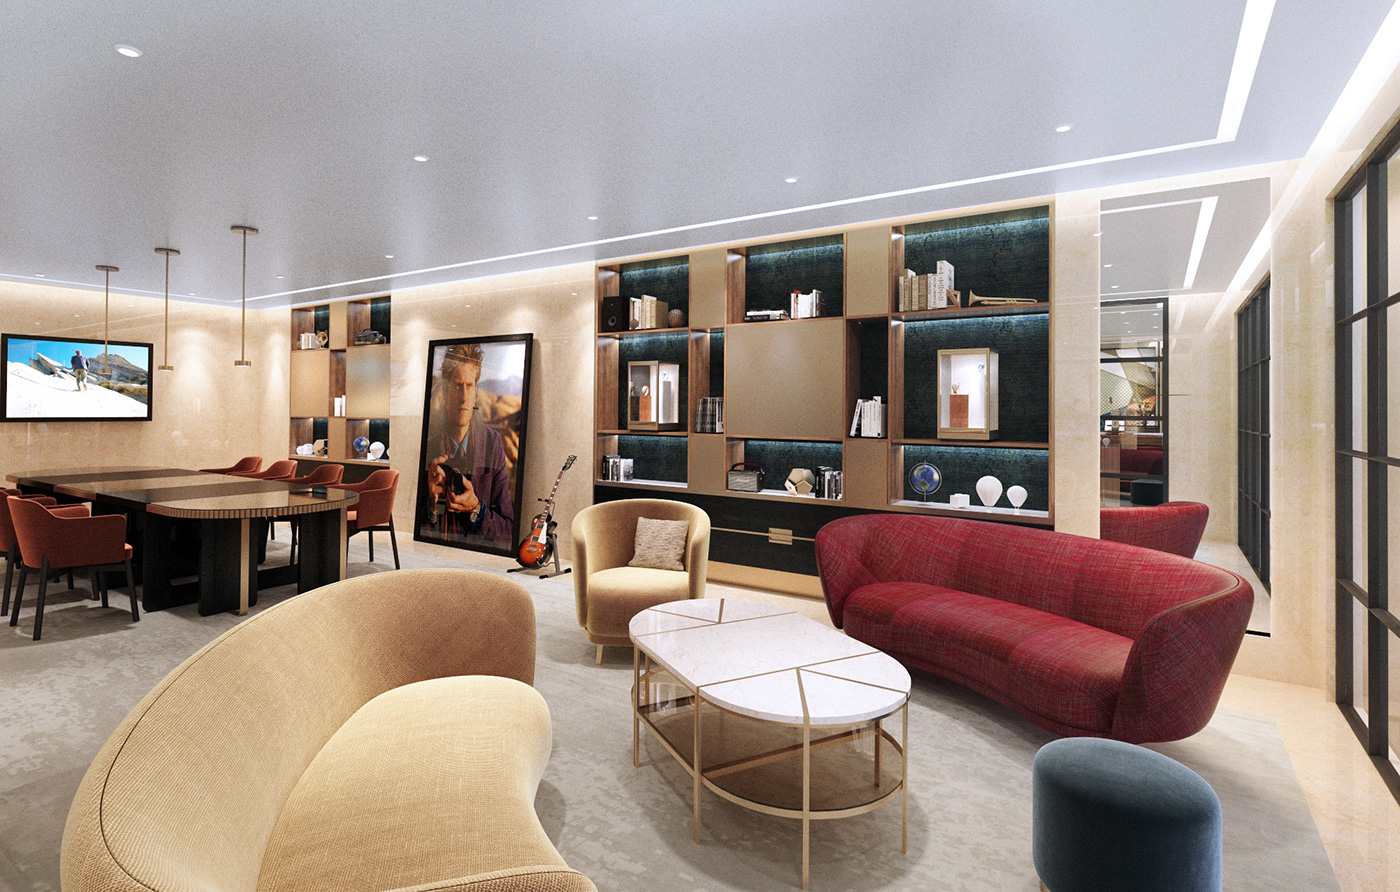 Vacheron Constantin's new flagship store in New York City includes lounges and a bar.